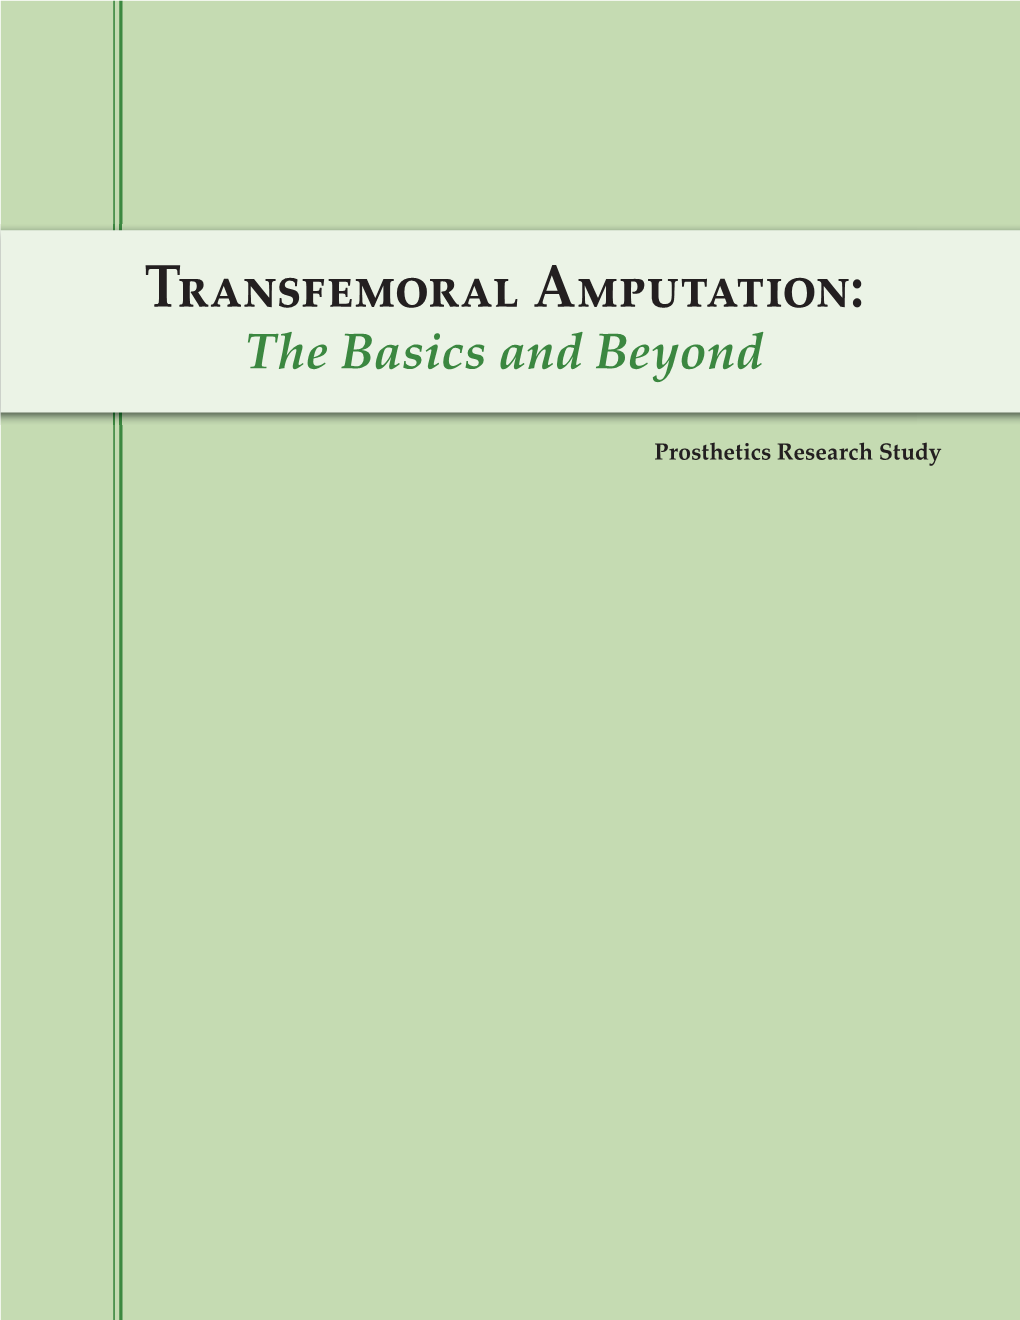 Transfemoral Amputations: the Basics and Beyond